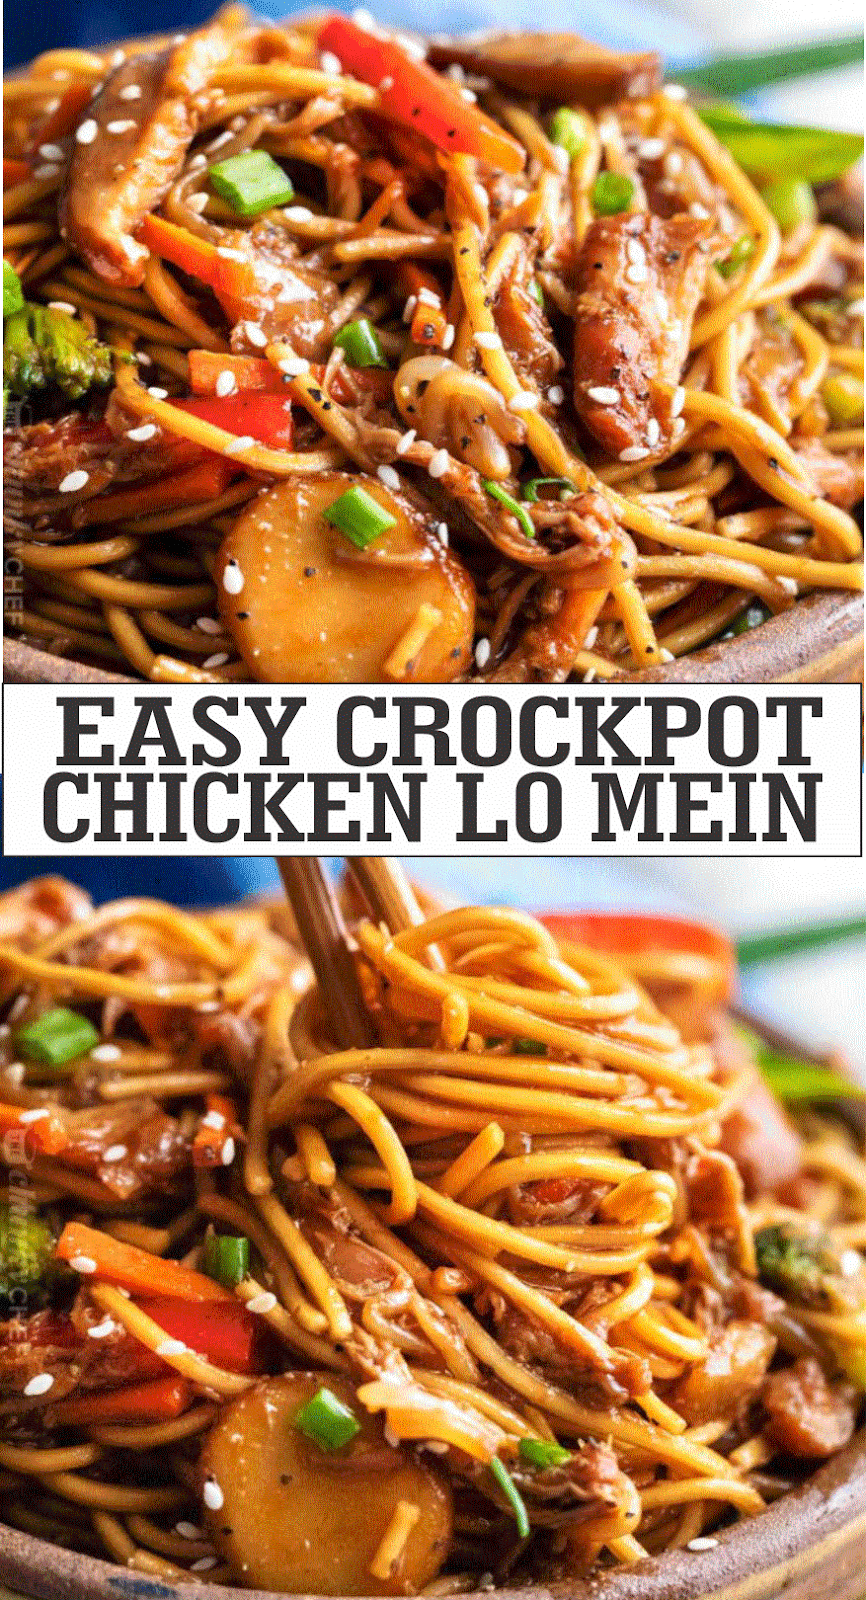 EASY CROCKPOT CHICKEN LO MEIN – Home Inspiration and DIY Crafts Ideas